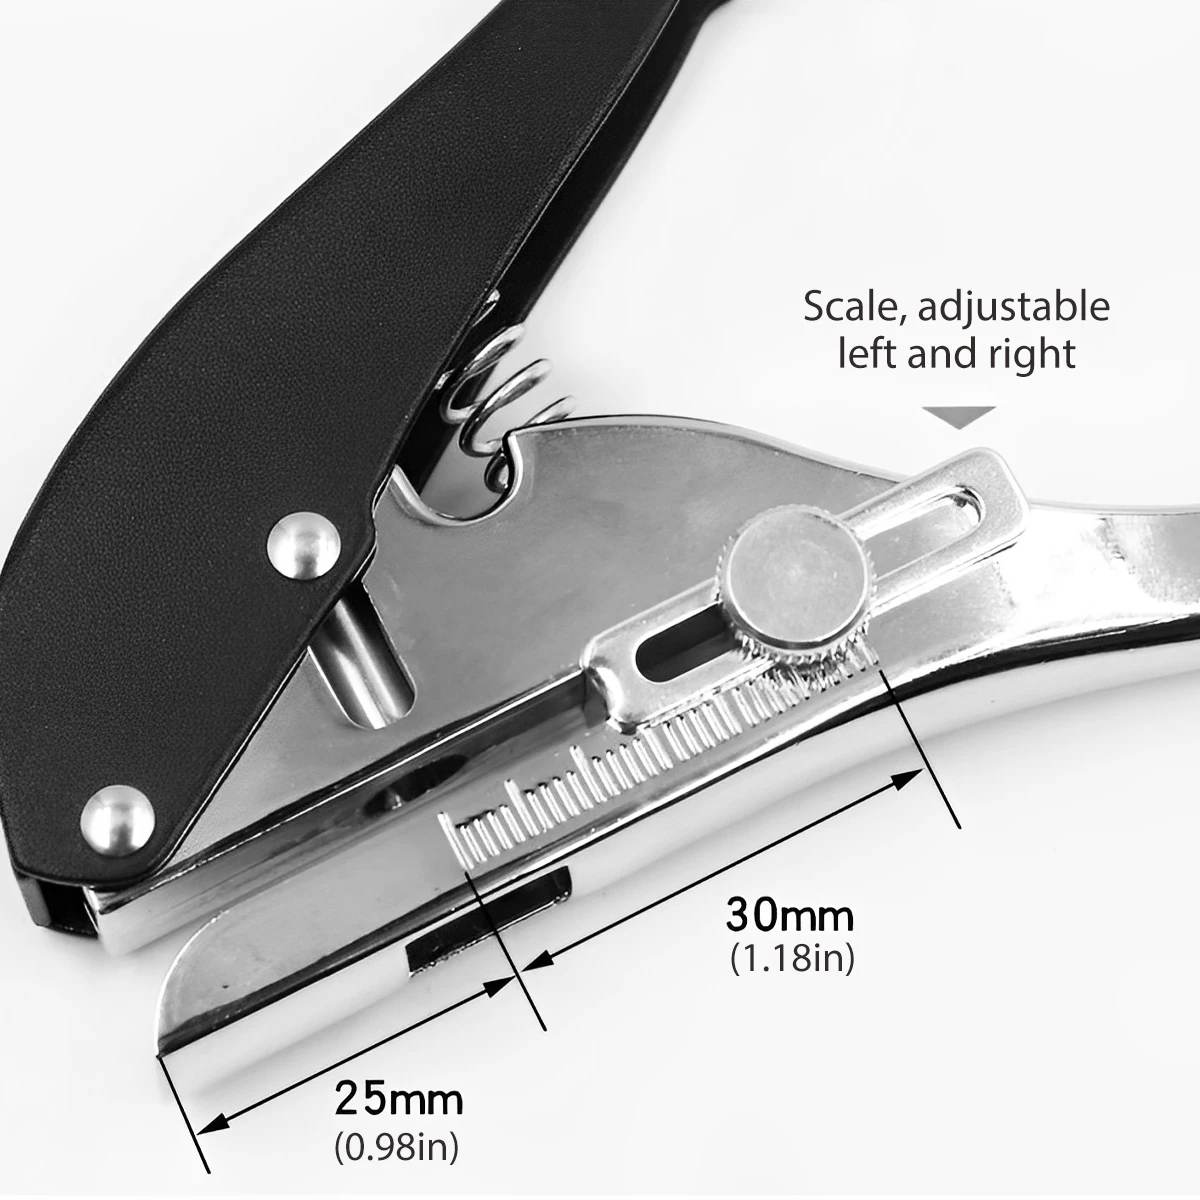 Buy (1/8-3MM HOLE) - 1/8 inch Hole Punch,Single Hole Punch Heavy Duty Hole  Punches Paper Punch Portable Hand Held Long Hole Punch Small Hole Puncher  Single for Tags Paper Cards Plastic Cardboard (